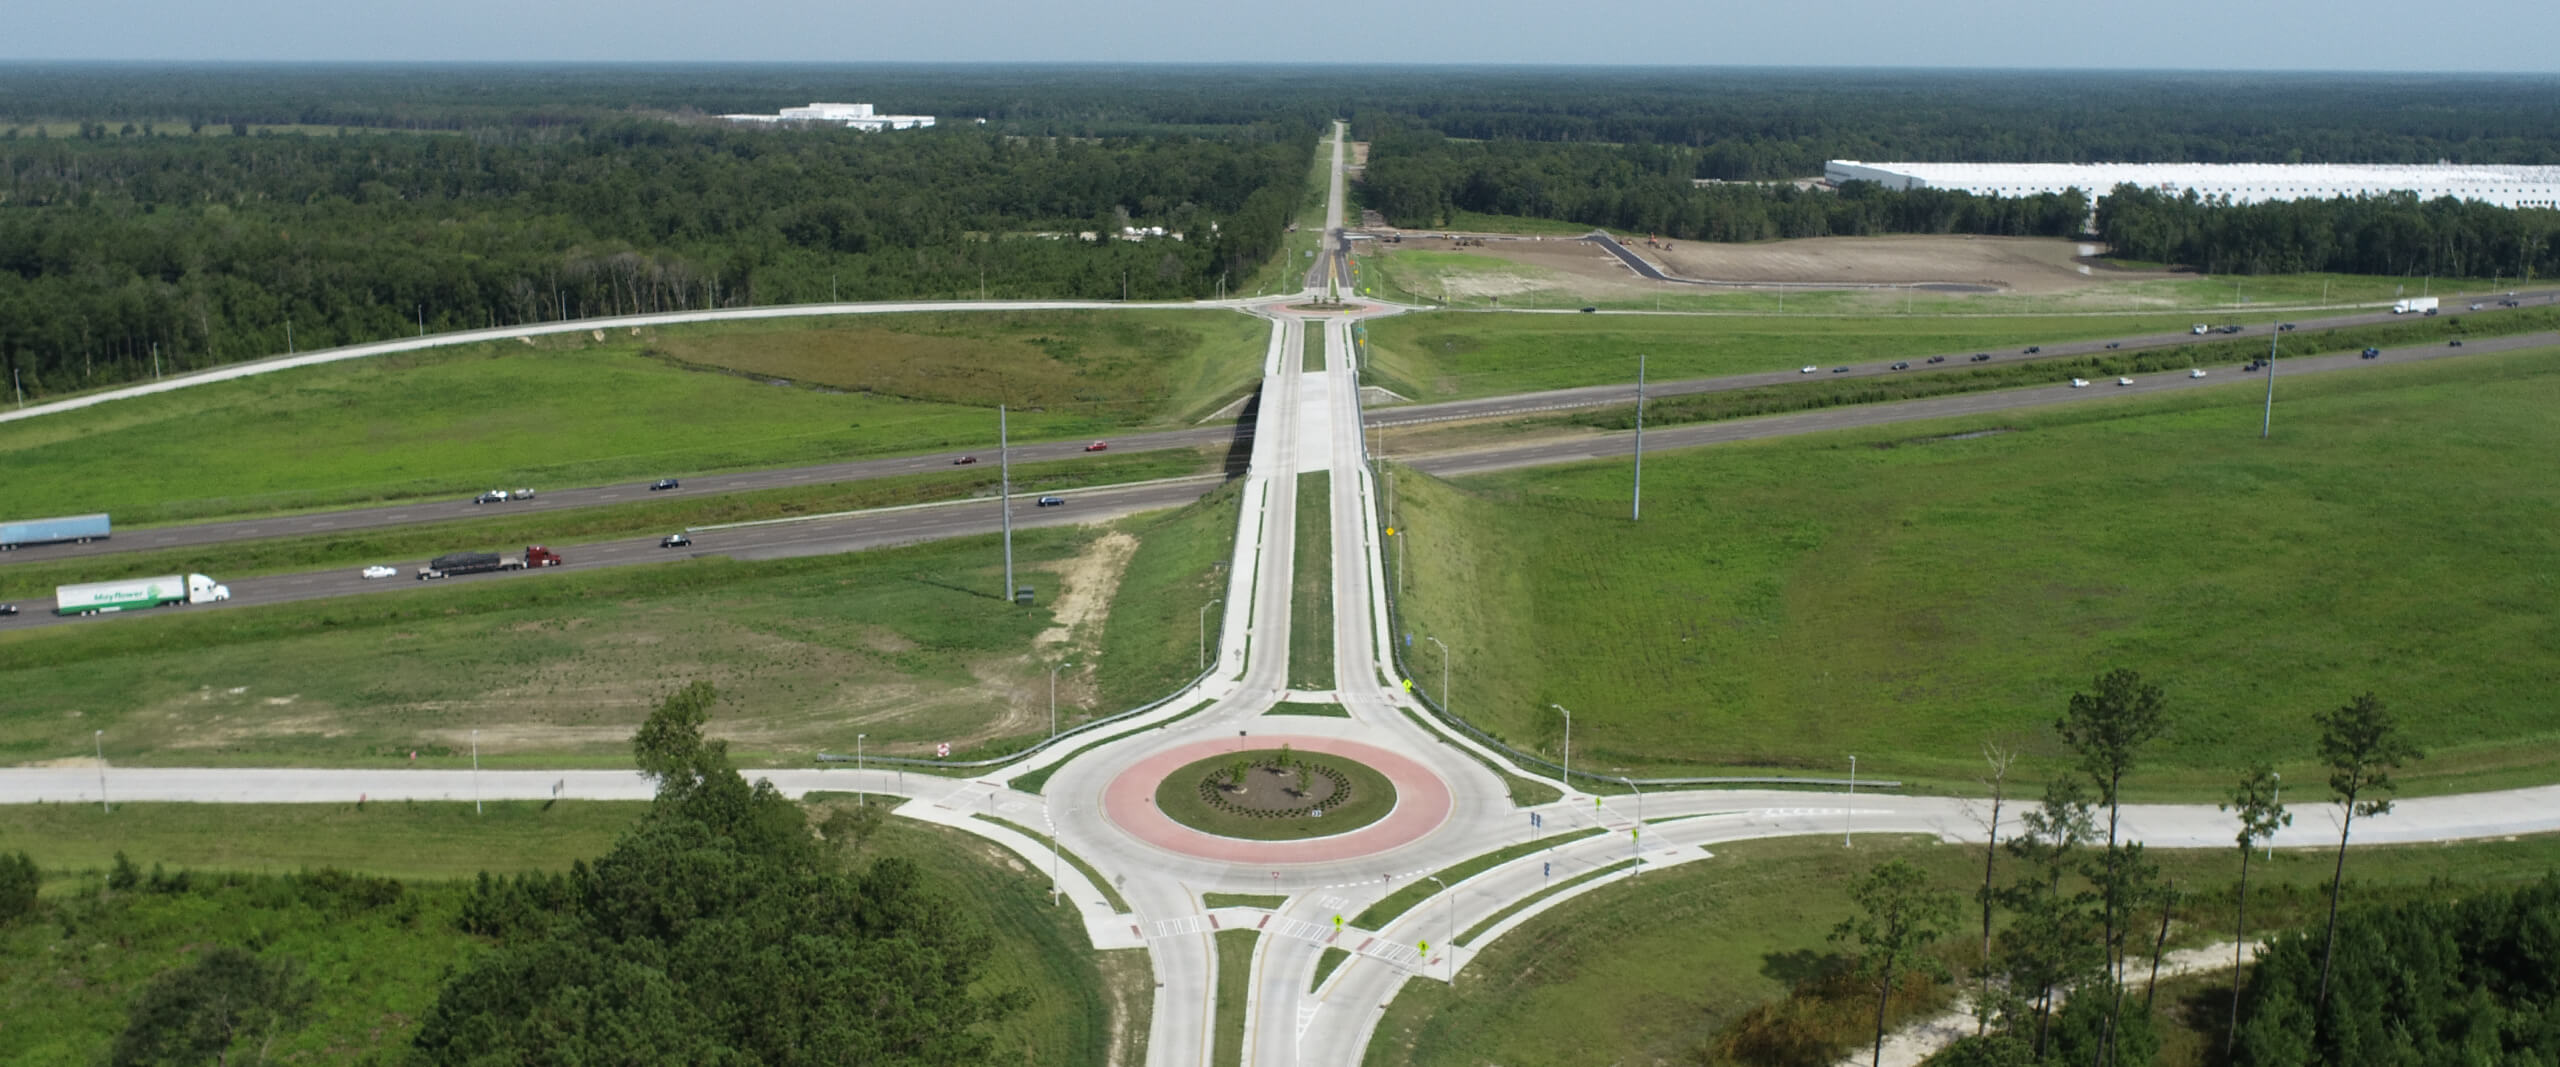 A road with two roundabouts shown